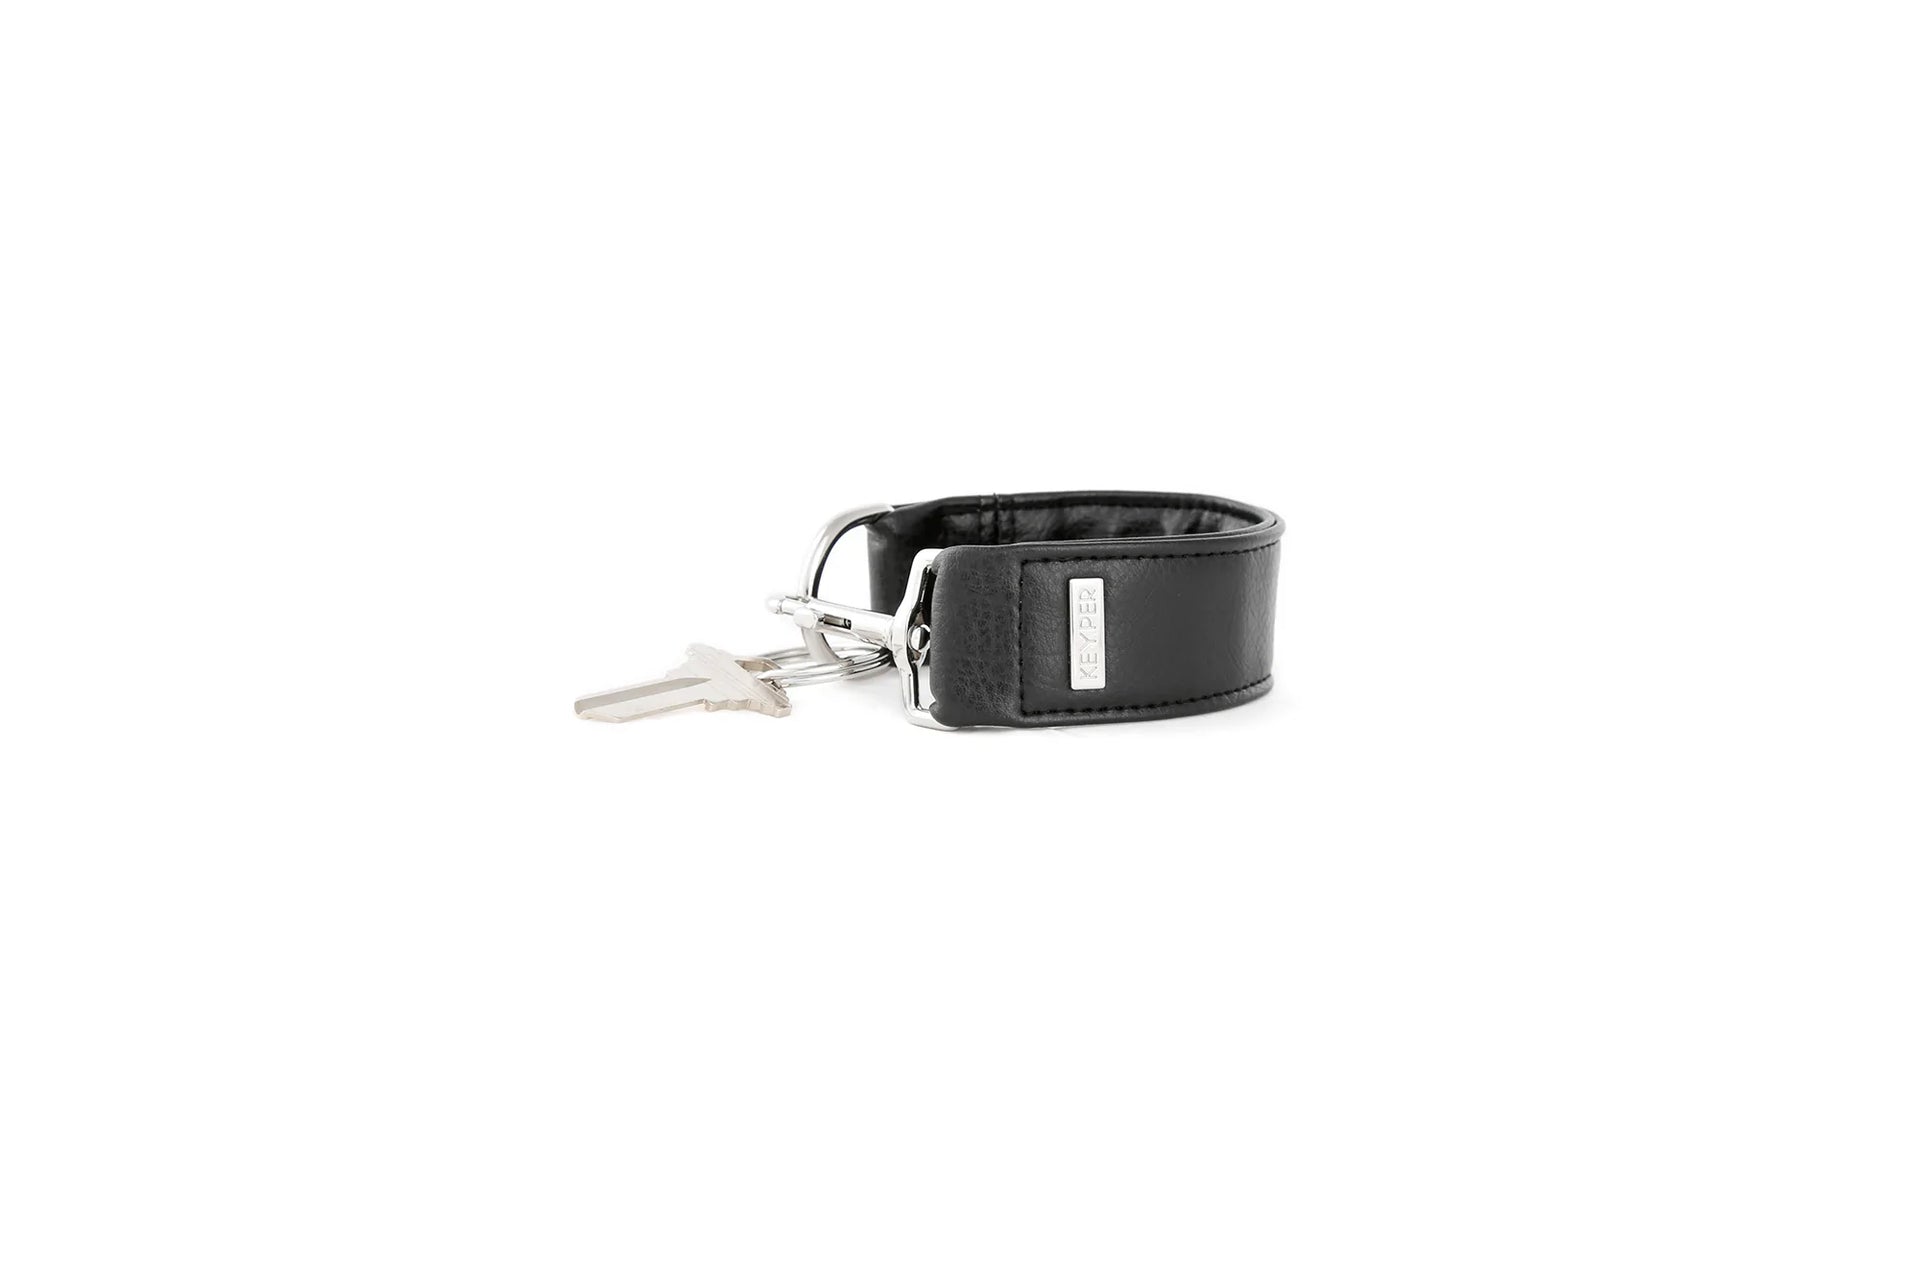 Coach Outlet Loop Key Fob in White for Men